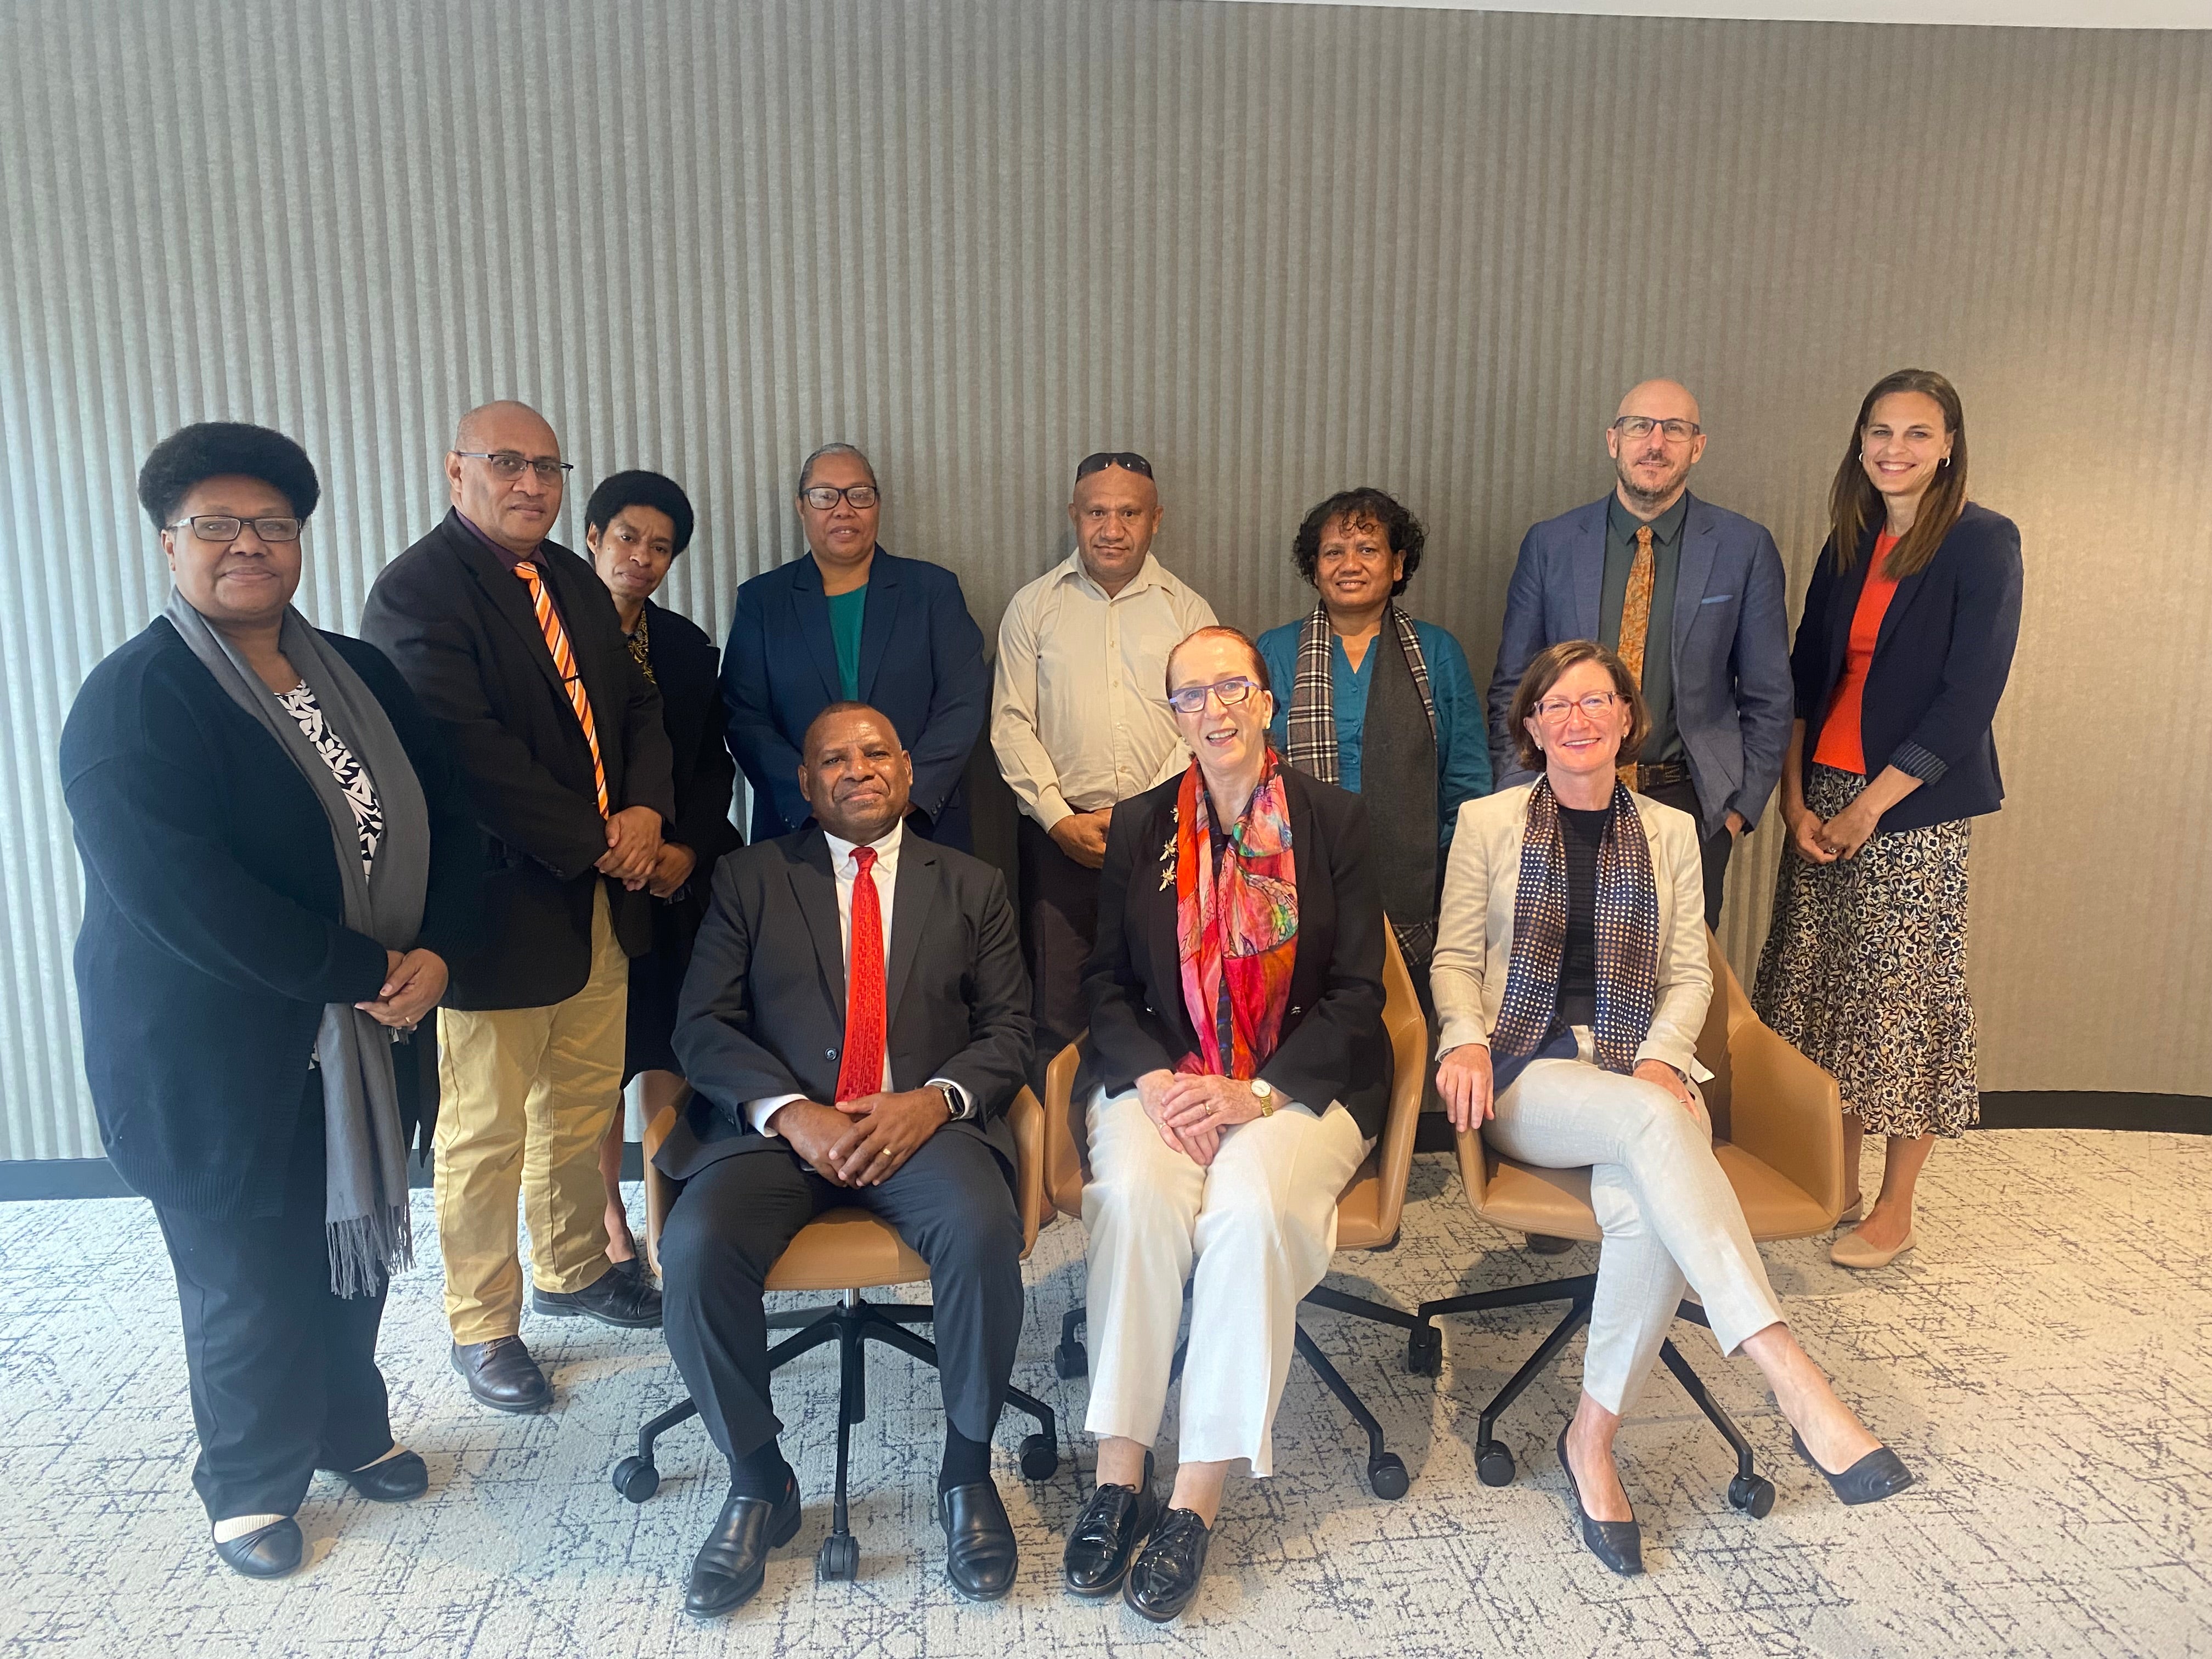 President Emeritus Professor Rosalind Croucher and CEO Leanne Smith sitting with representatives from the PNG Department of Justice and Attorney General